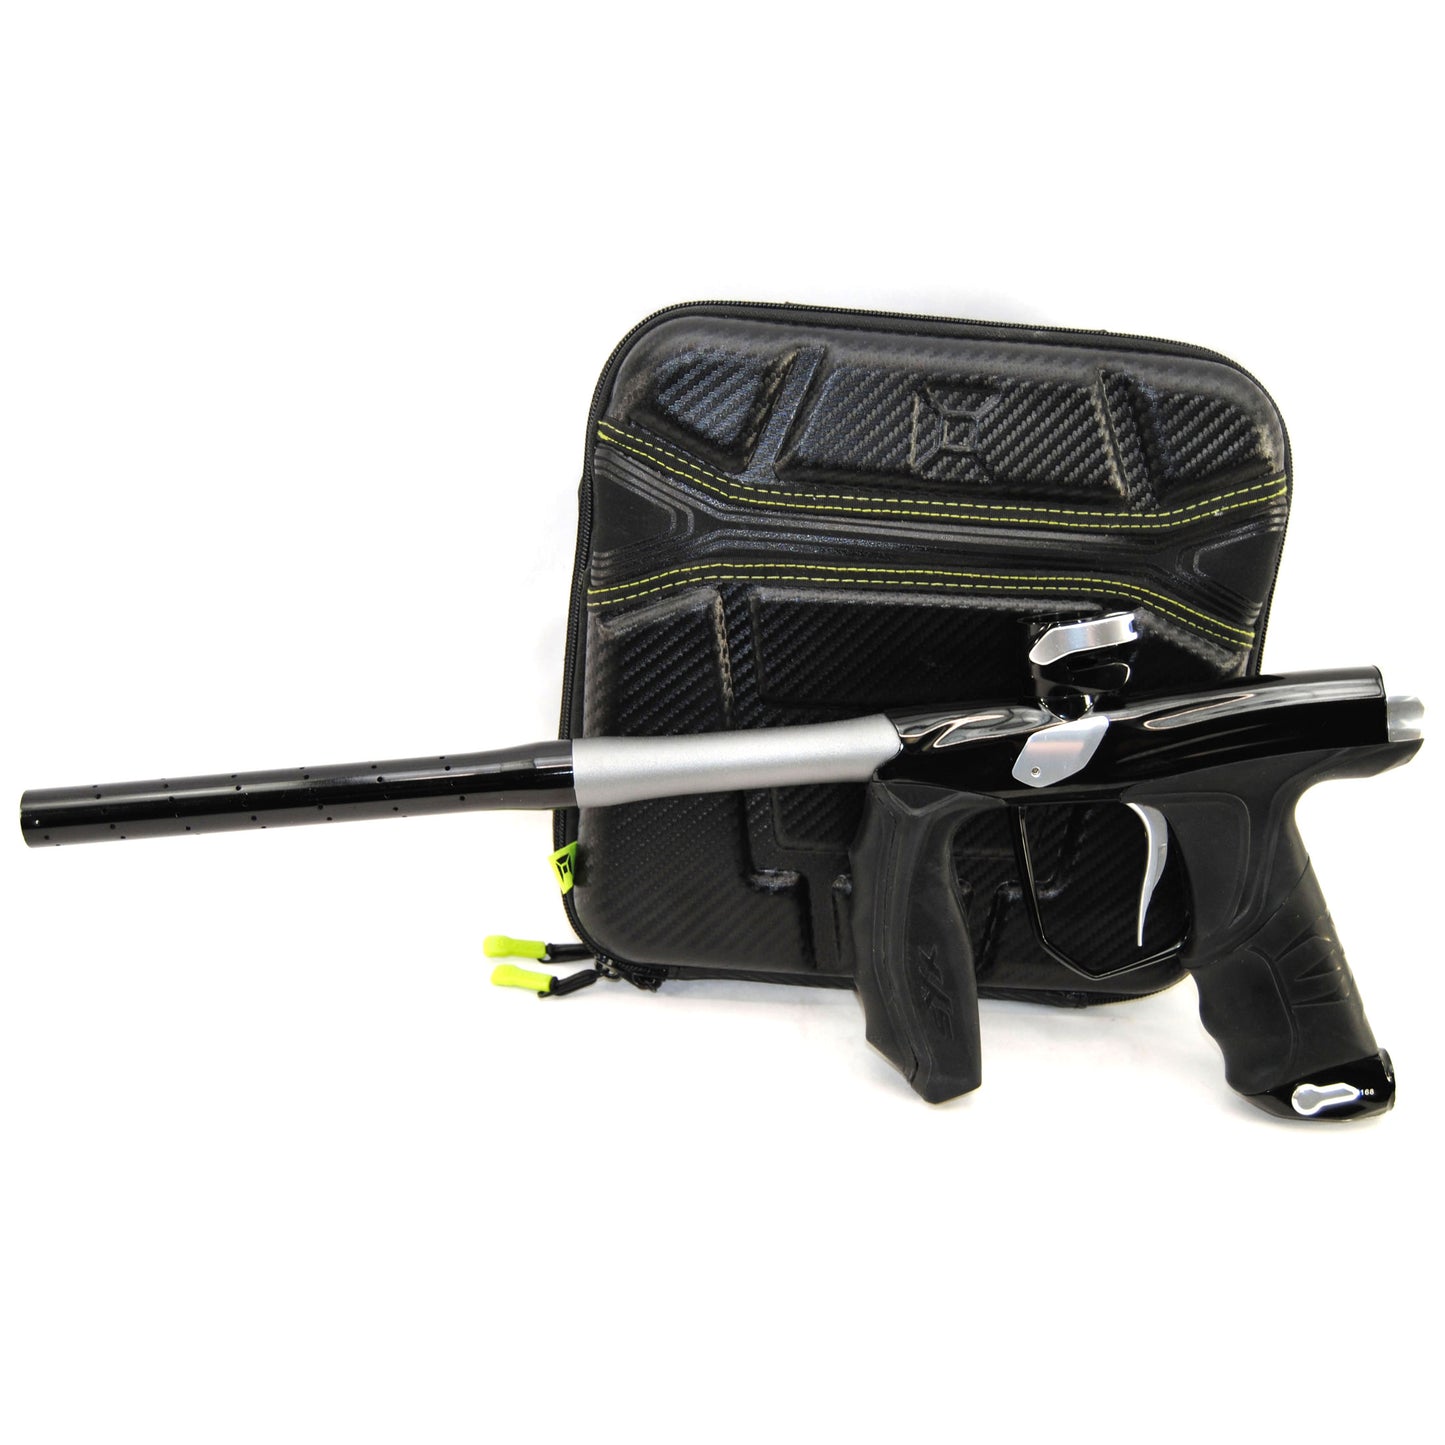 Used Empire Syx 1.5 Paintball Gun - Black/Silver